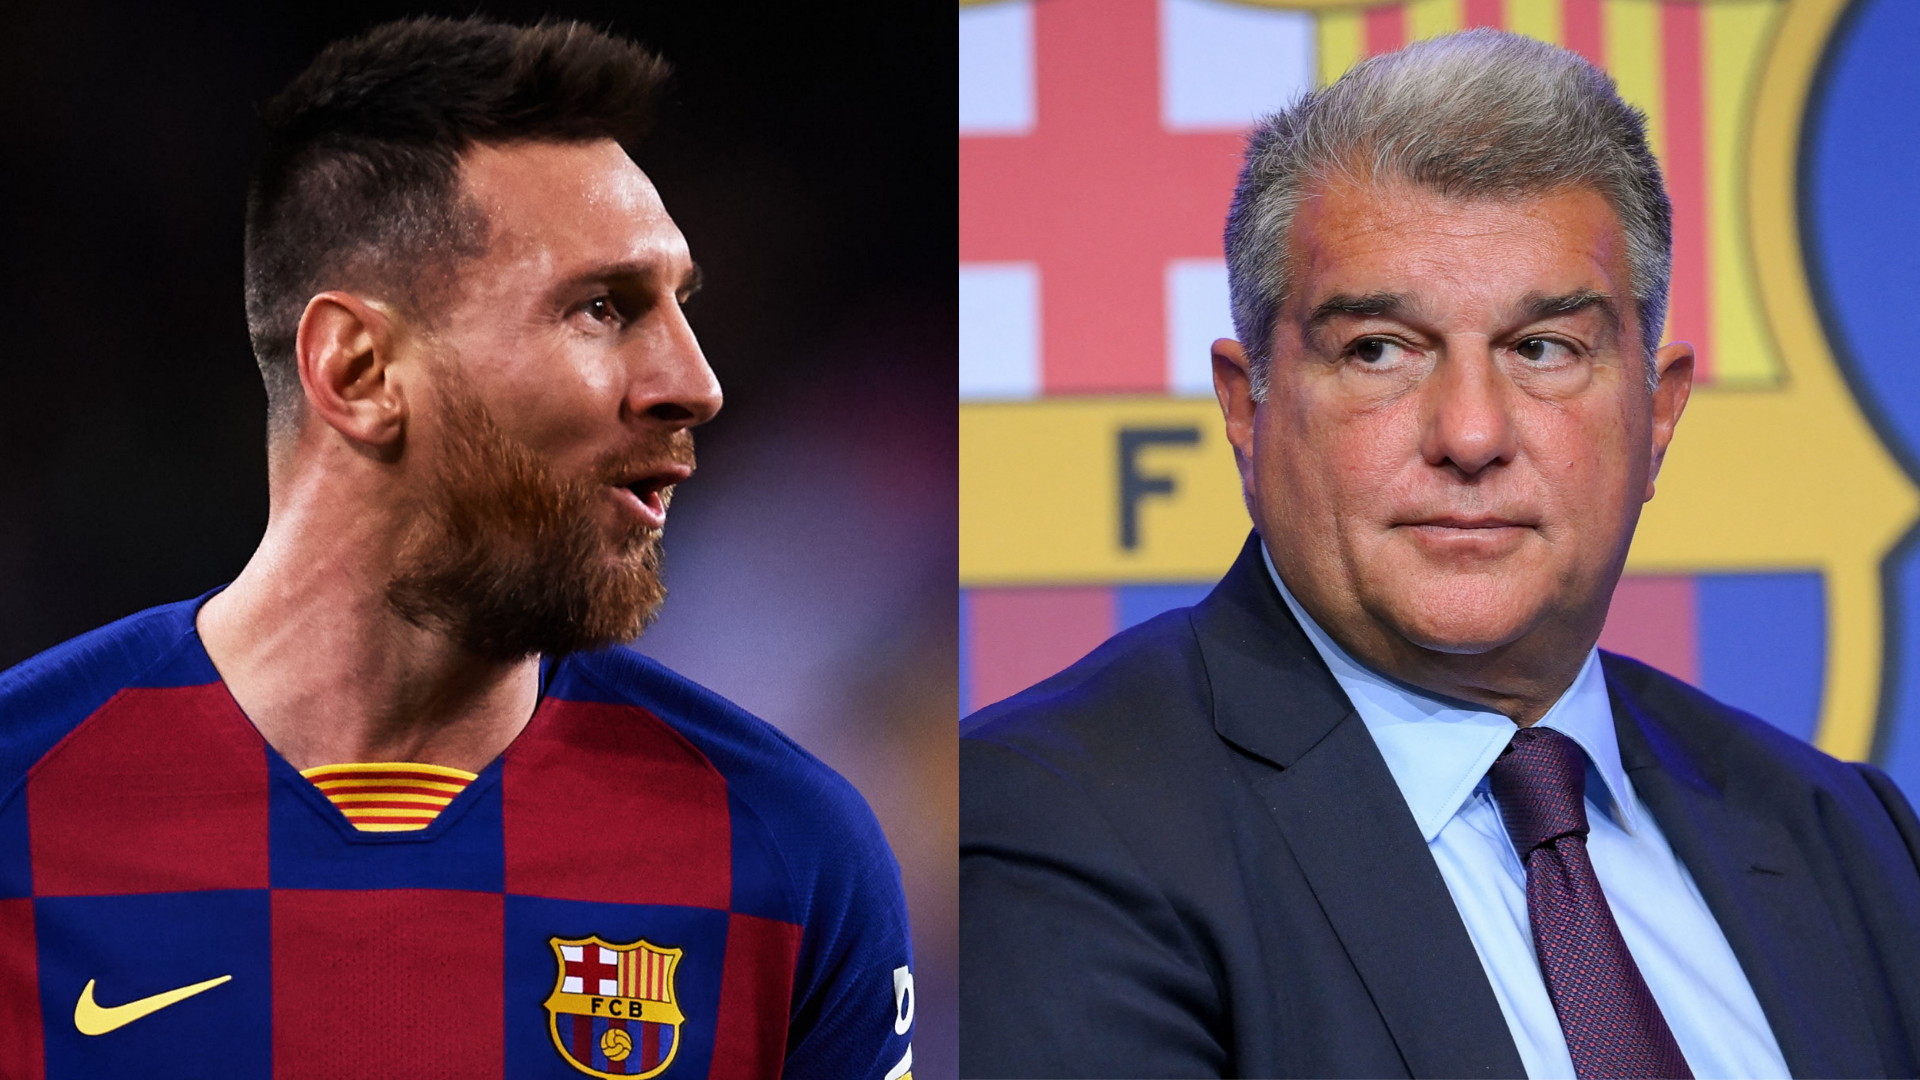 Lionel Messi’s potential Barcelona return labelled a ‘farce’ as relationship with Blaugrana president Joan Laporta is ‘not the best’